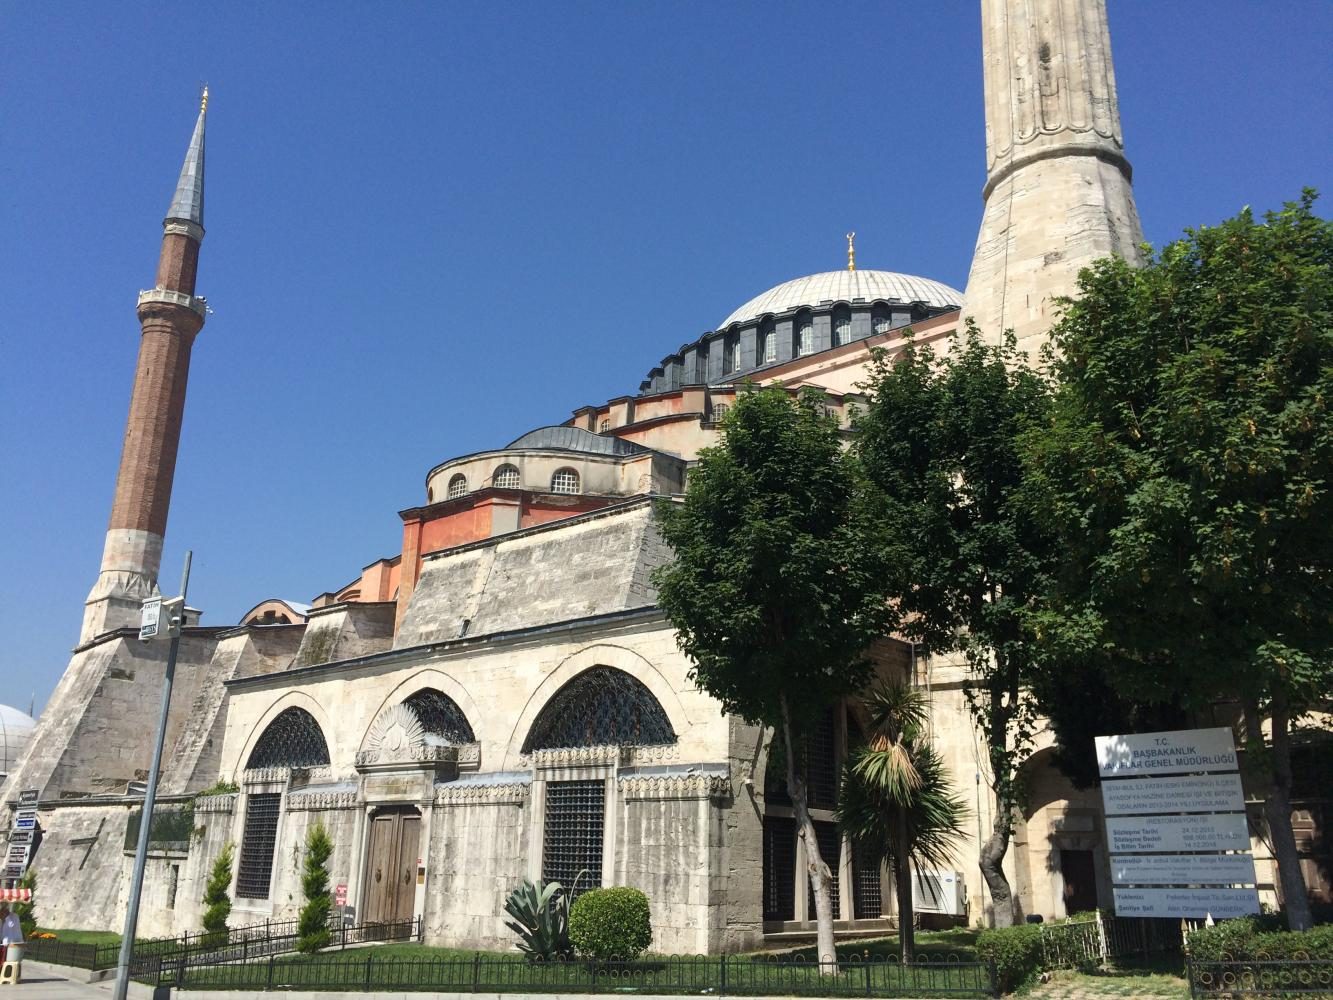 The outside of the Hagia Sophia, the third basilica at the site. Remnants of the second basilica can still be seen by the entrance of the church-turned-mosque-turned museum.  